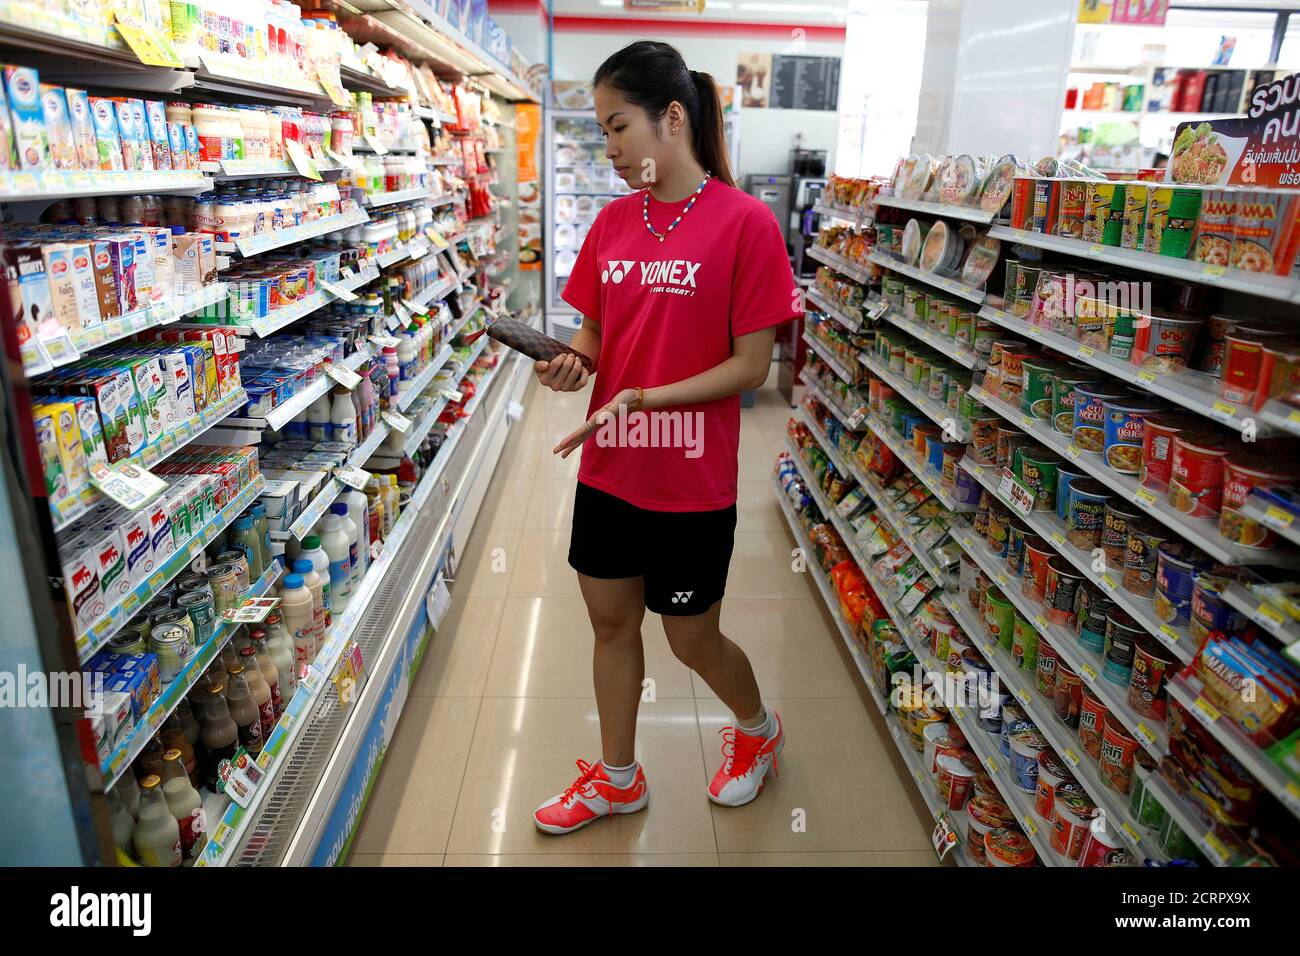 Thailand's badminton player Ratchanok Intanon (C), who hopes to win gold at  the Rio Olympics, shops after an afternoon training session at a  convenience store in Bangkok, Thailand, June 22, 2016. Picture